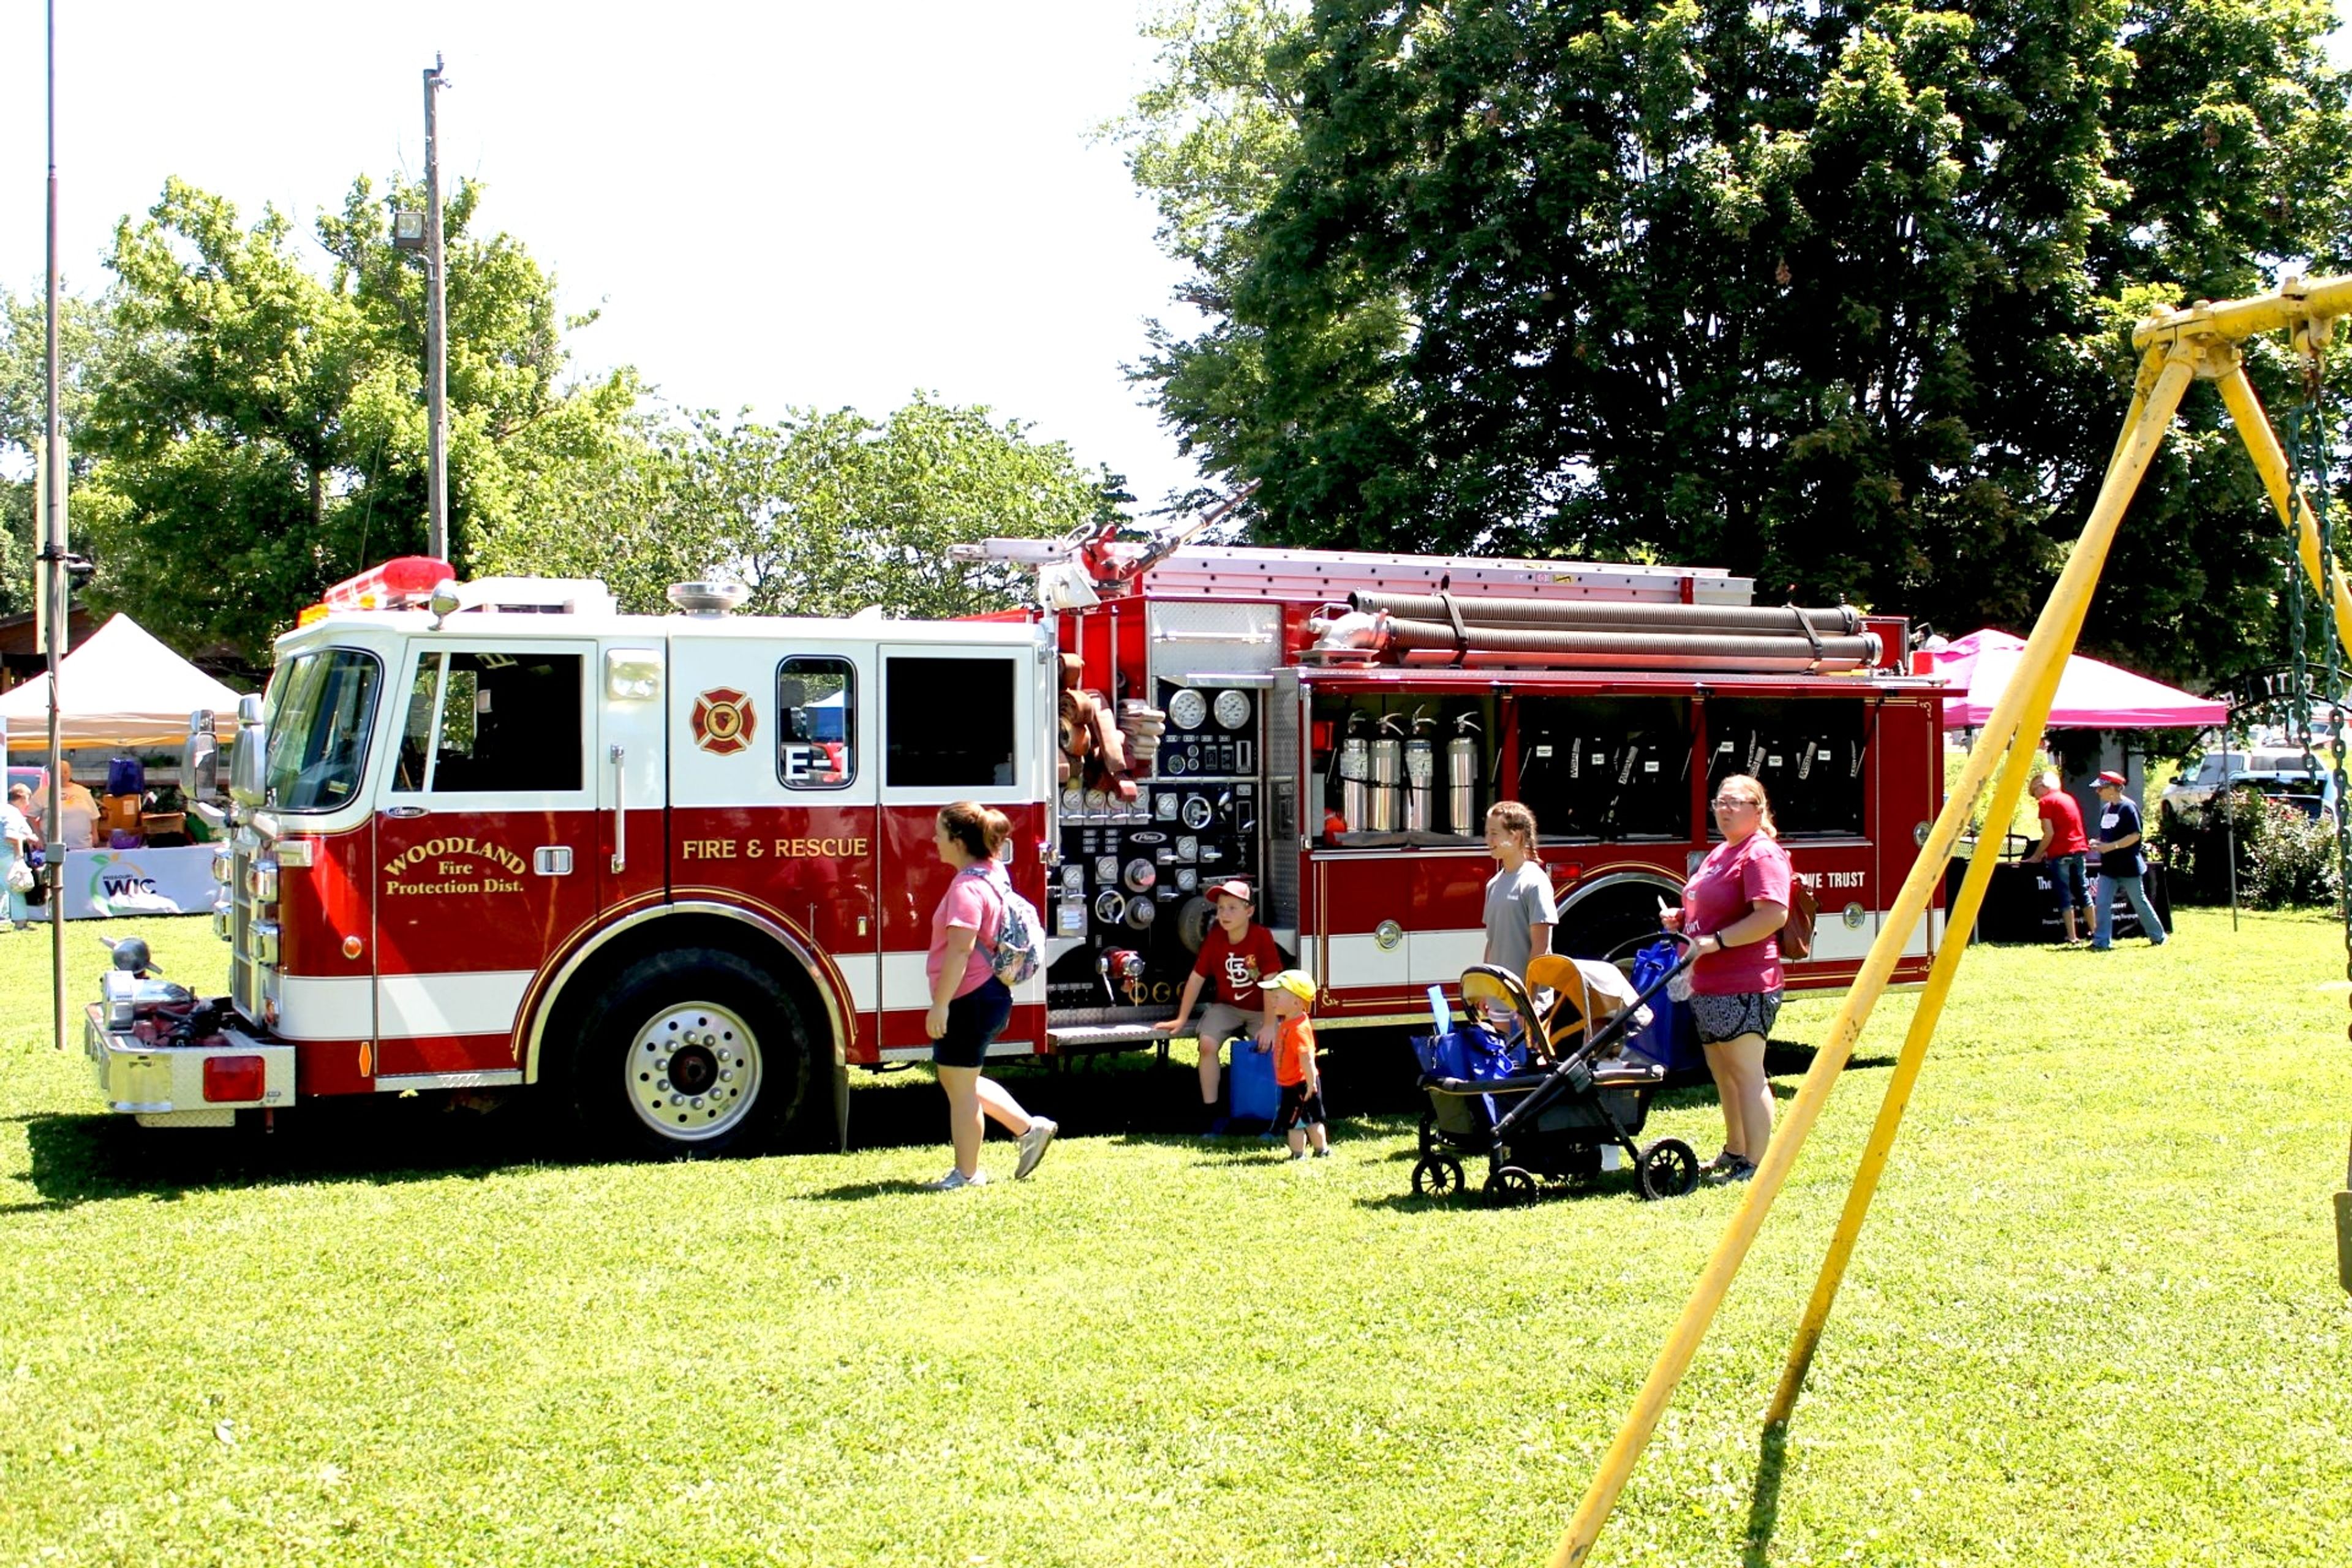 Juanita Welker's family checks out Woodland Fire Protection District's fire truck during the resource fair. Juanita Welker is administrator of Bollinger County Health Center.